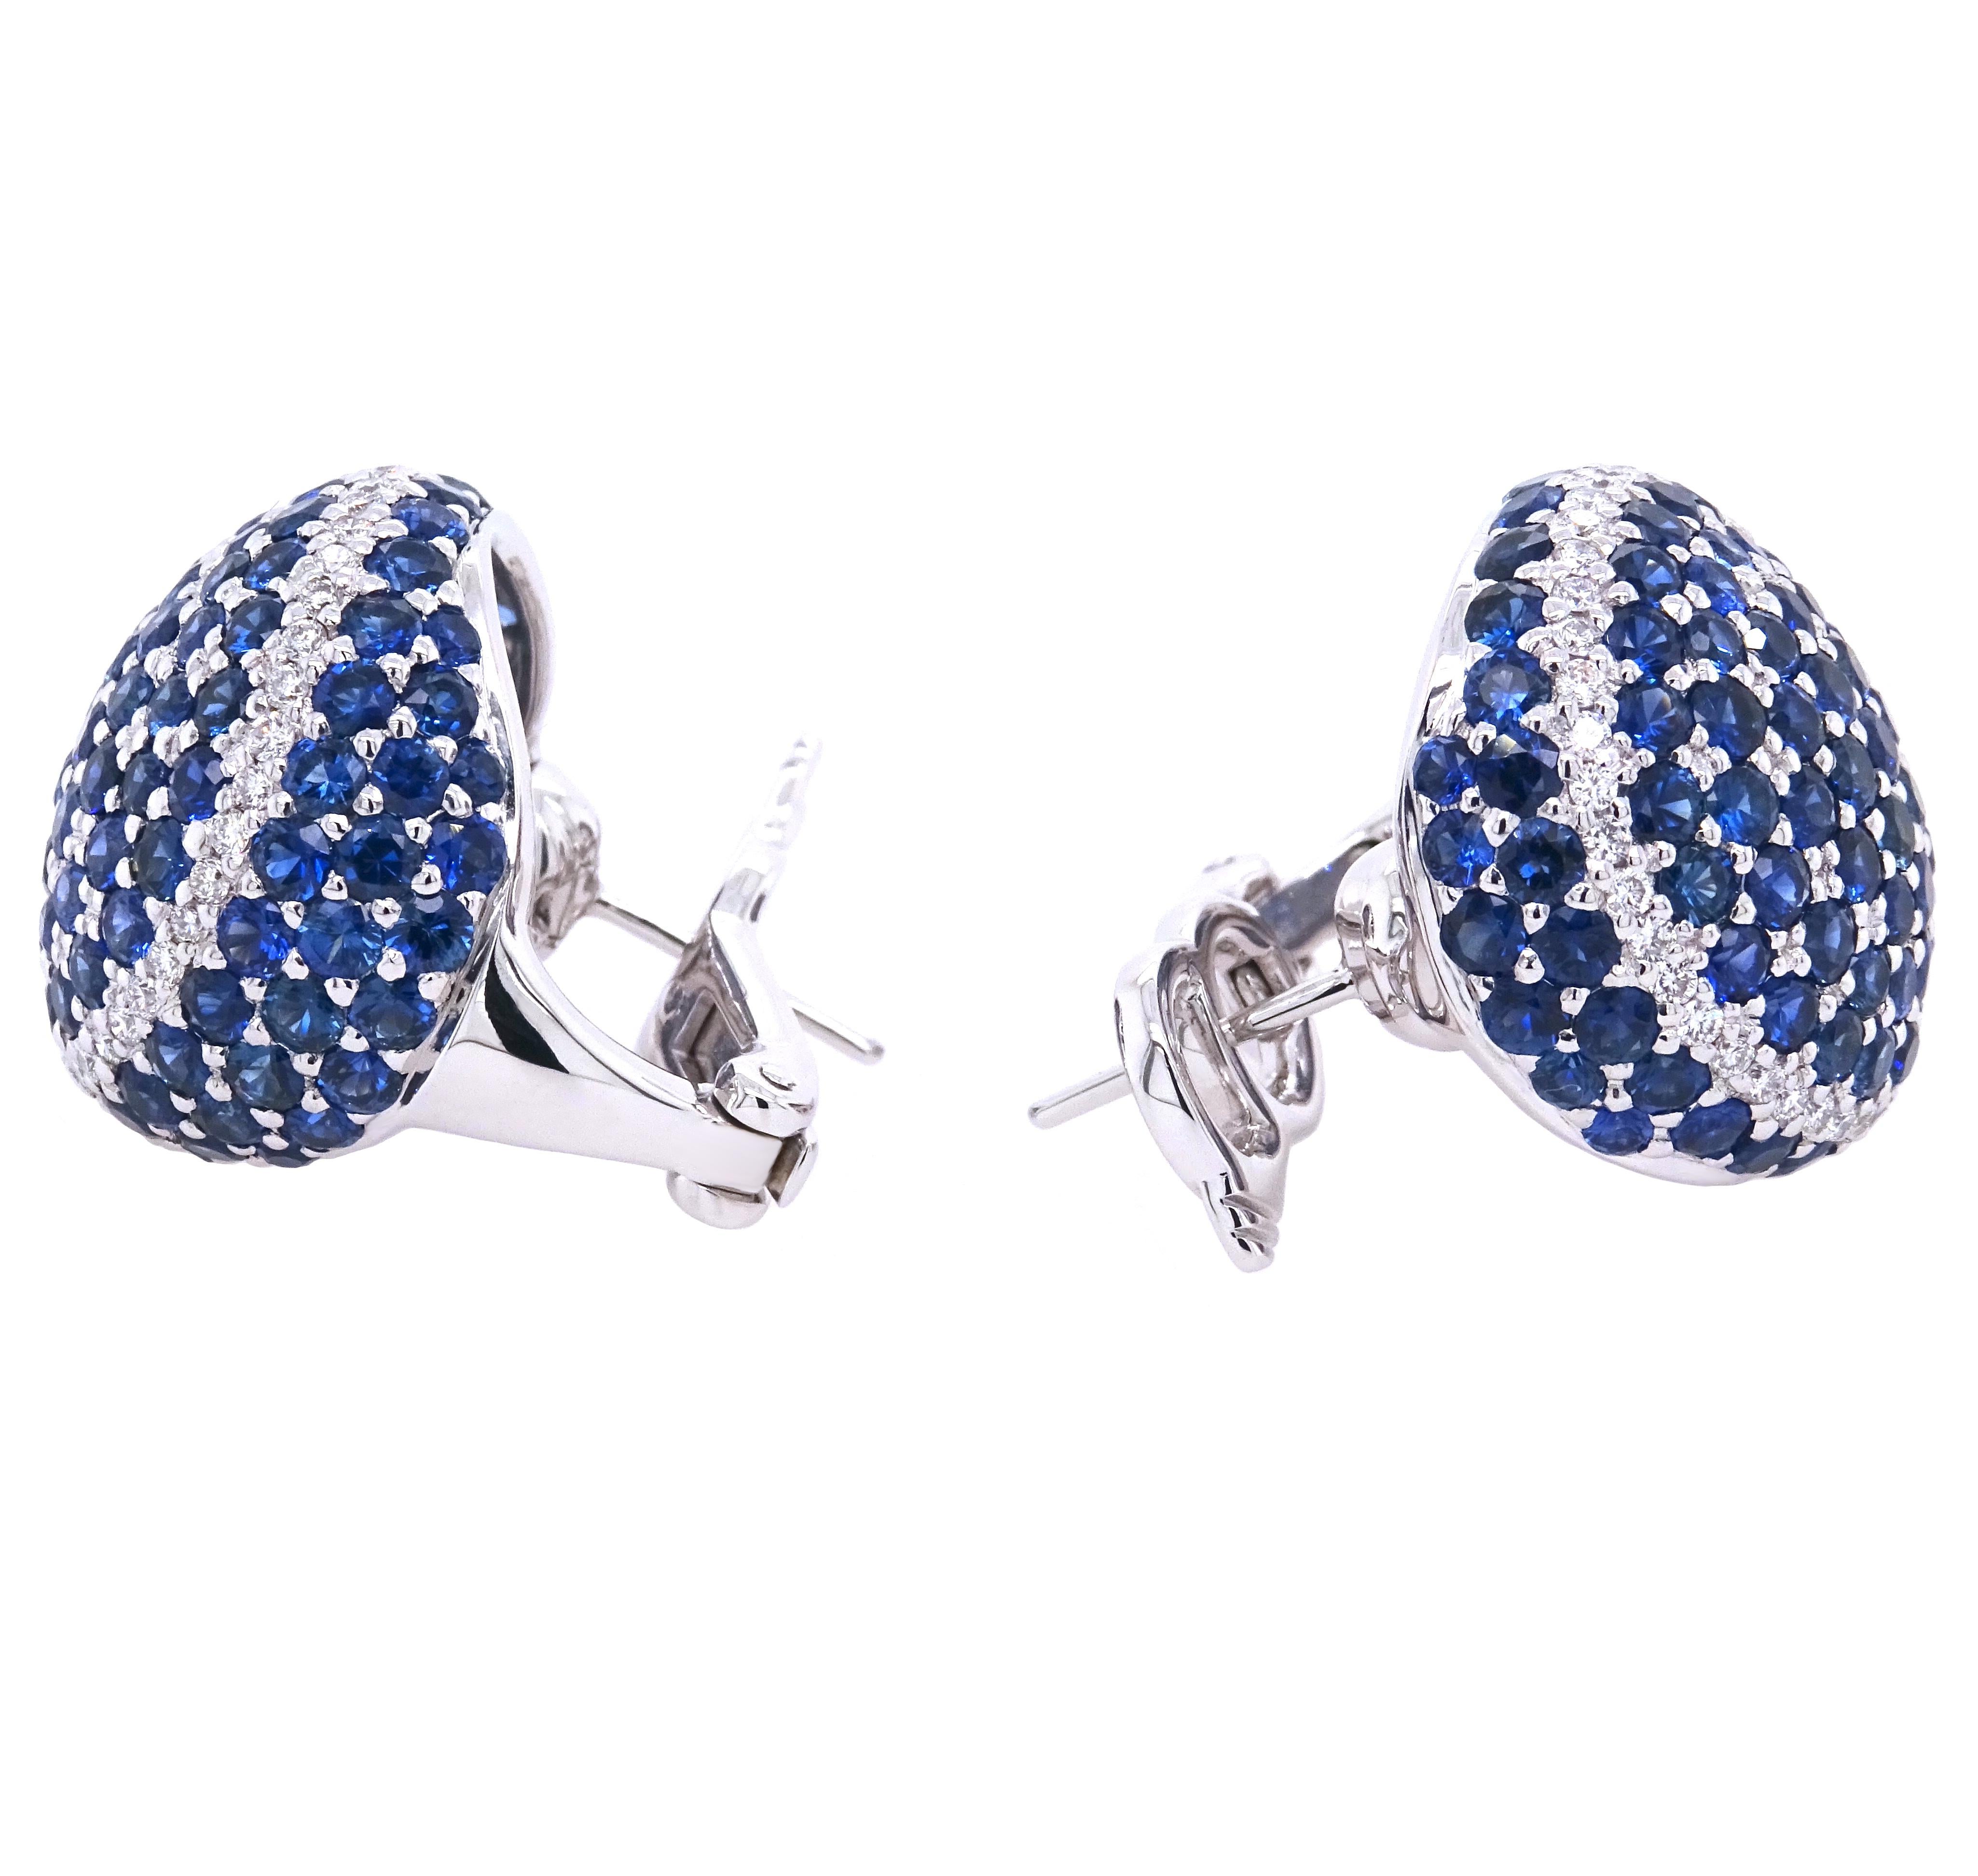 Embrace the timeless elegance of our exquisite 18K white gold earrings, adorned with a captivating combination of round blue sapphires and round white diamonds. The dazzling blue sapphires, totaling 9.62 carats, add a rich and alluring hue that